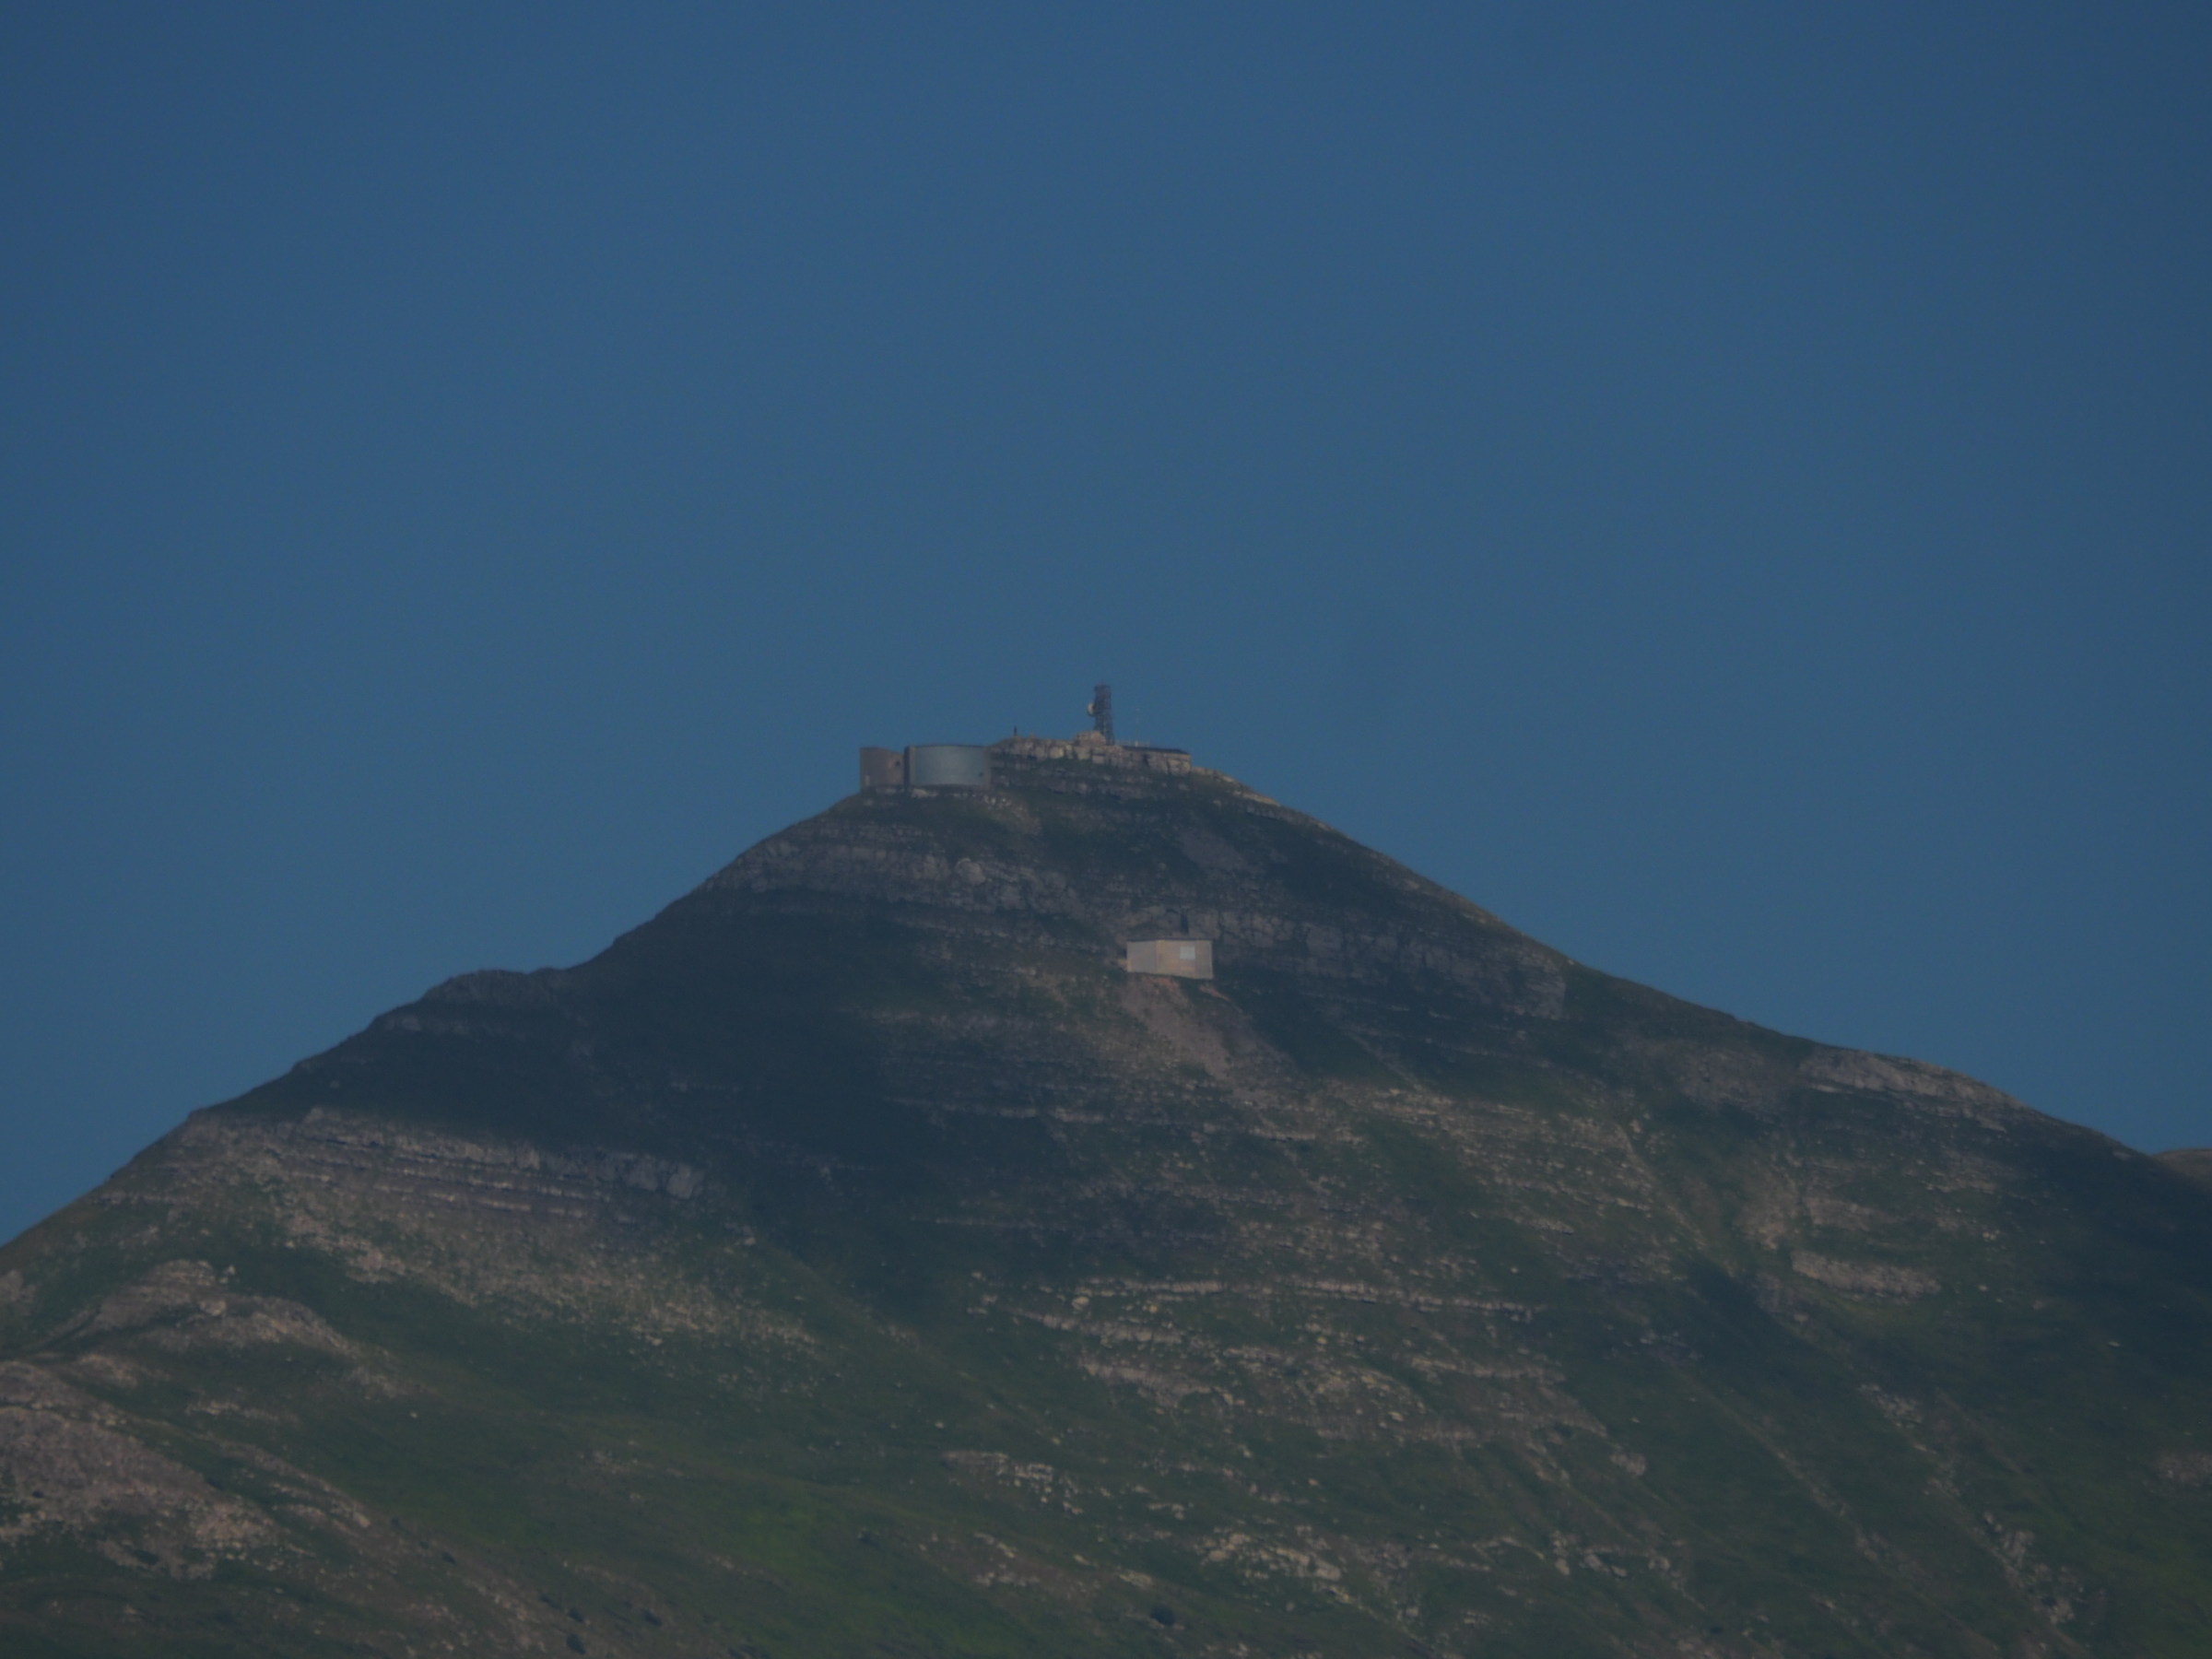 The summit of the Cimone...